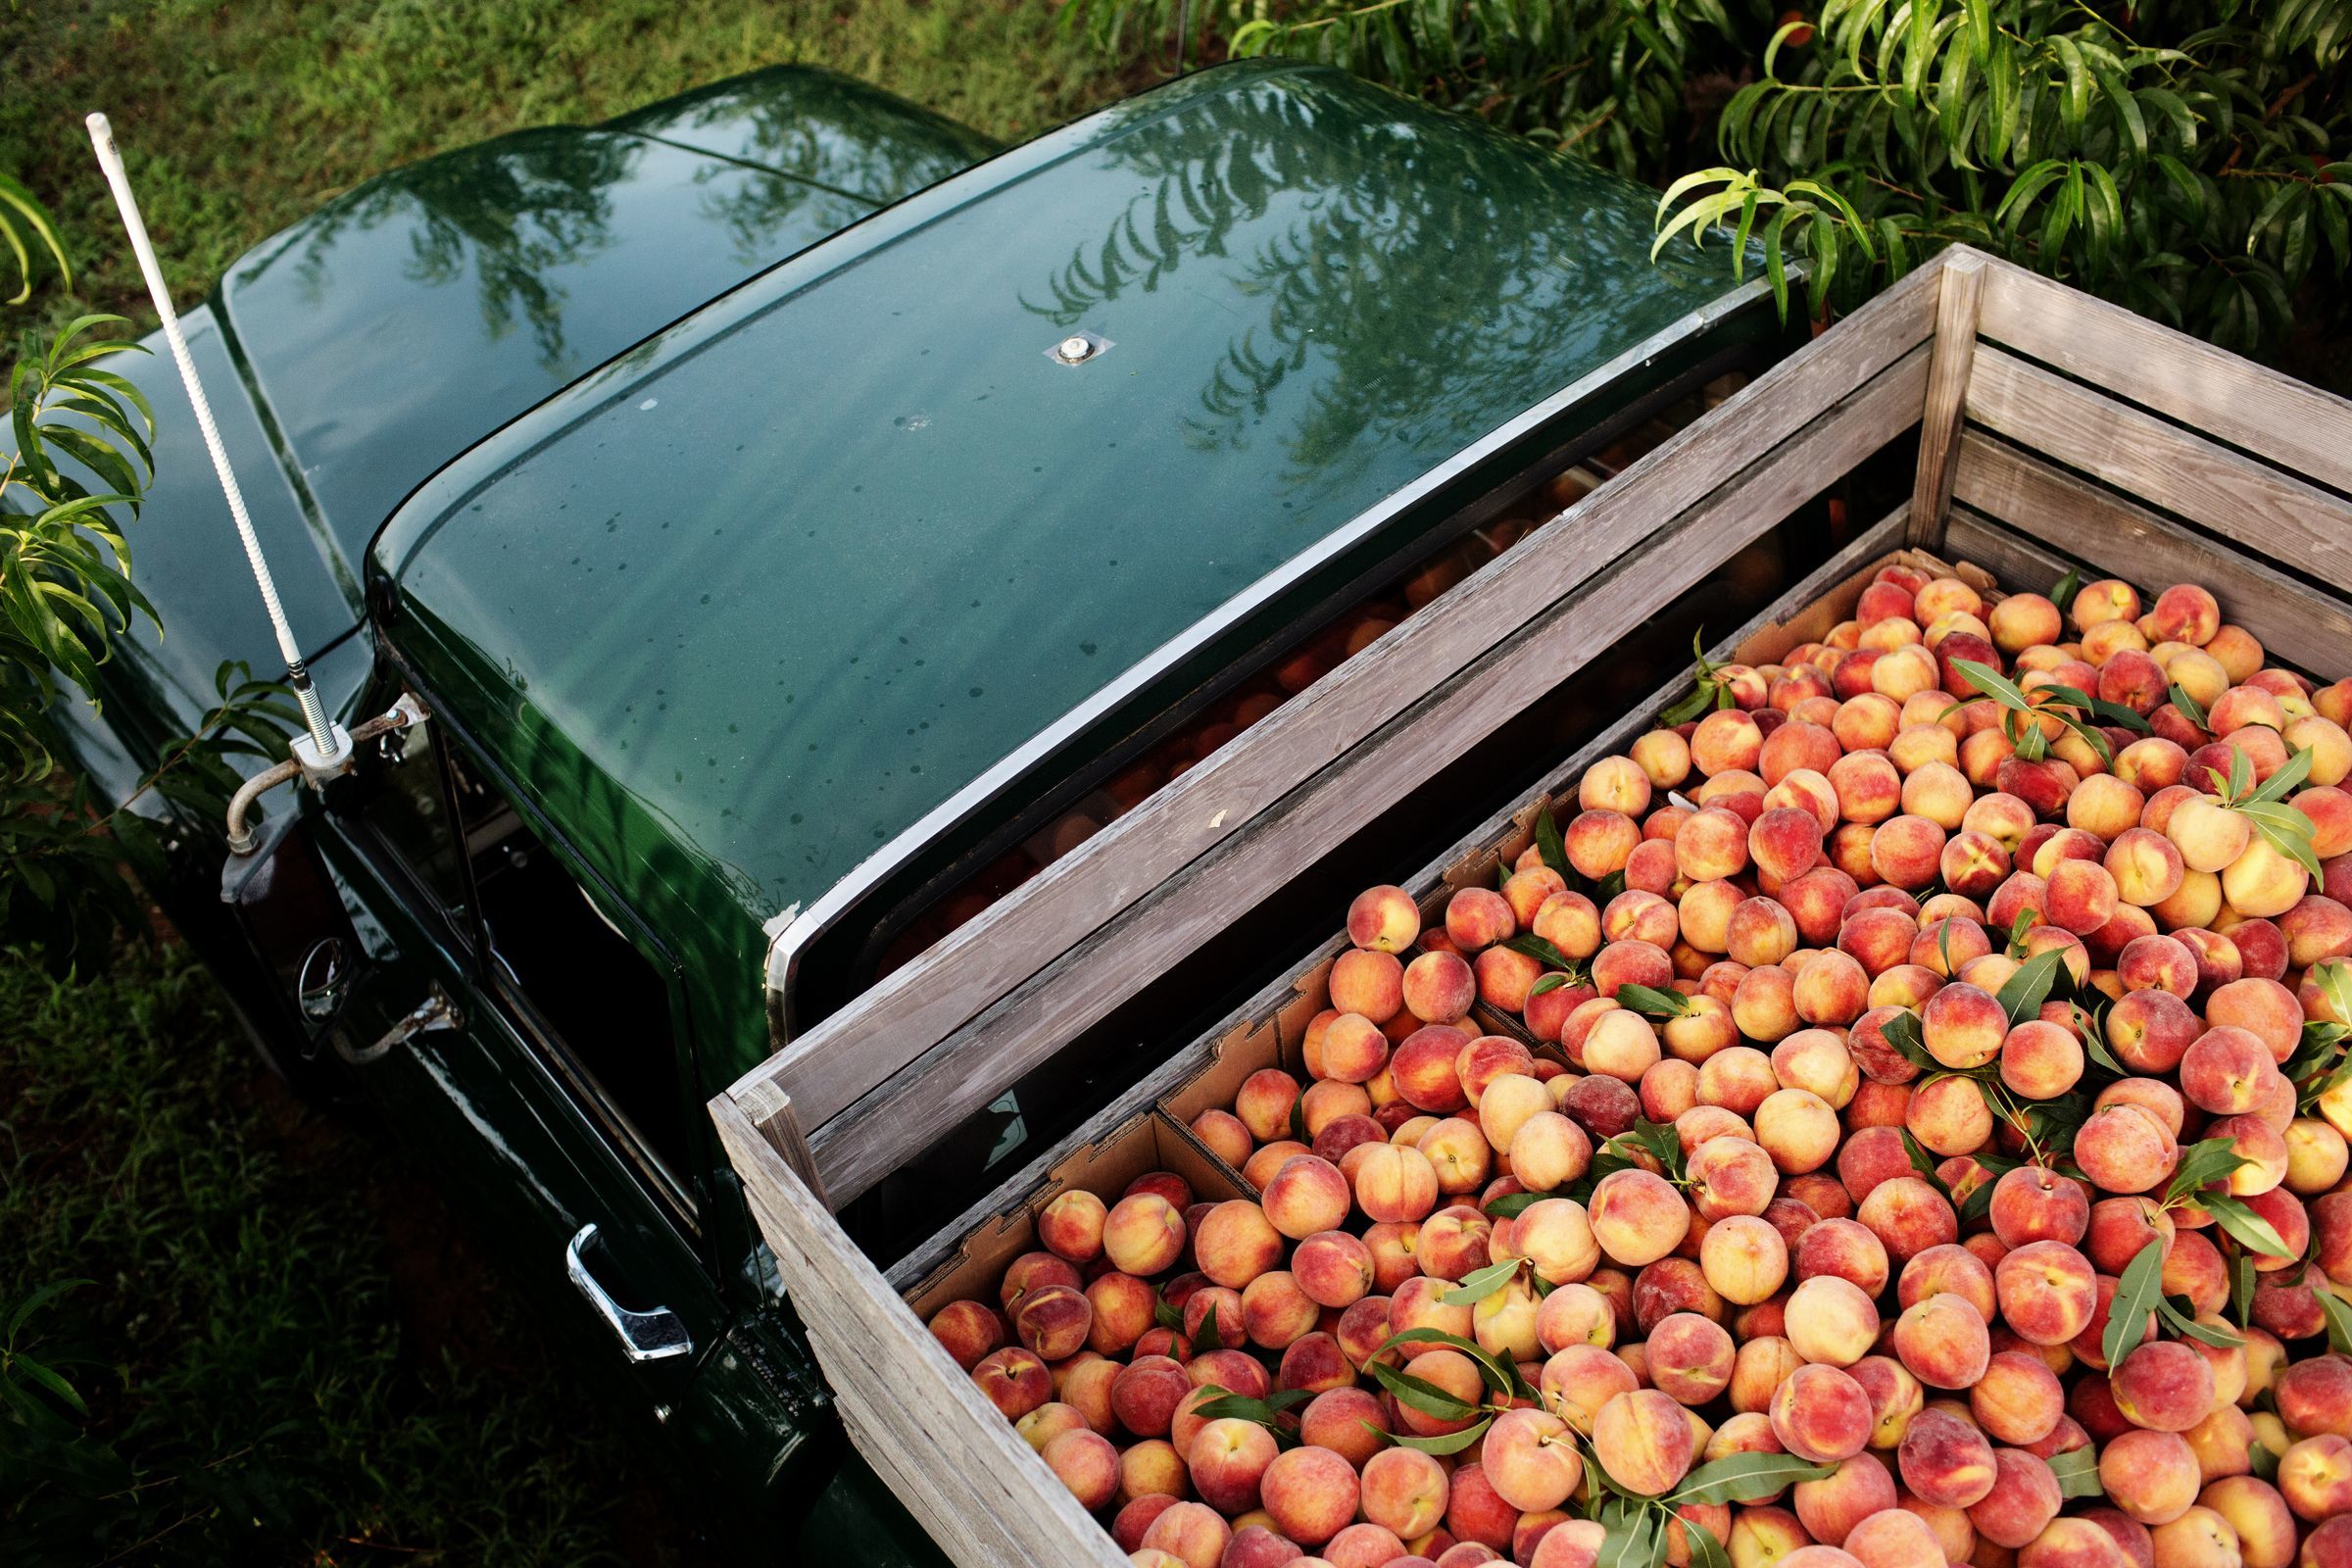 Peach Truck tour 2019 When, where you'll find it in metro Detroit